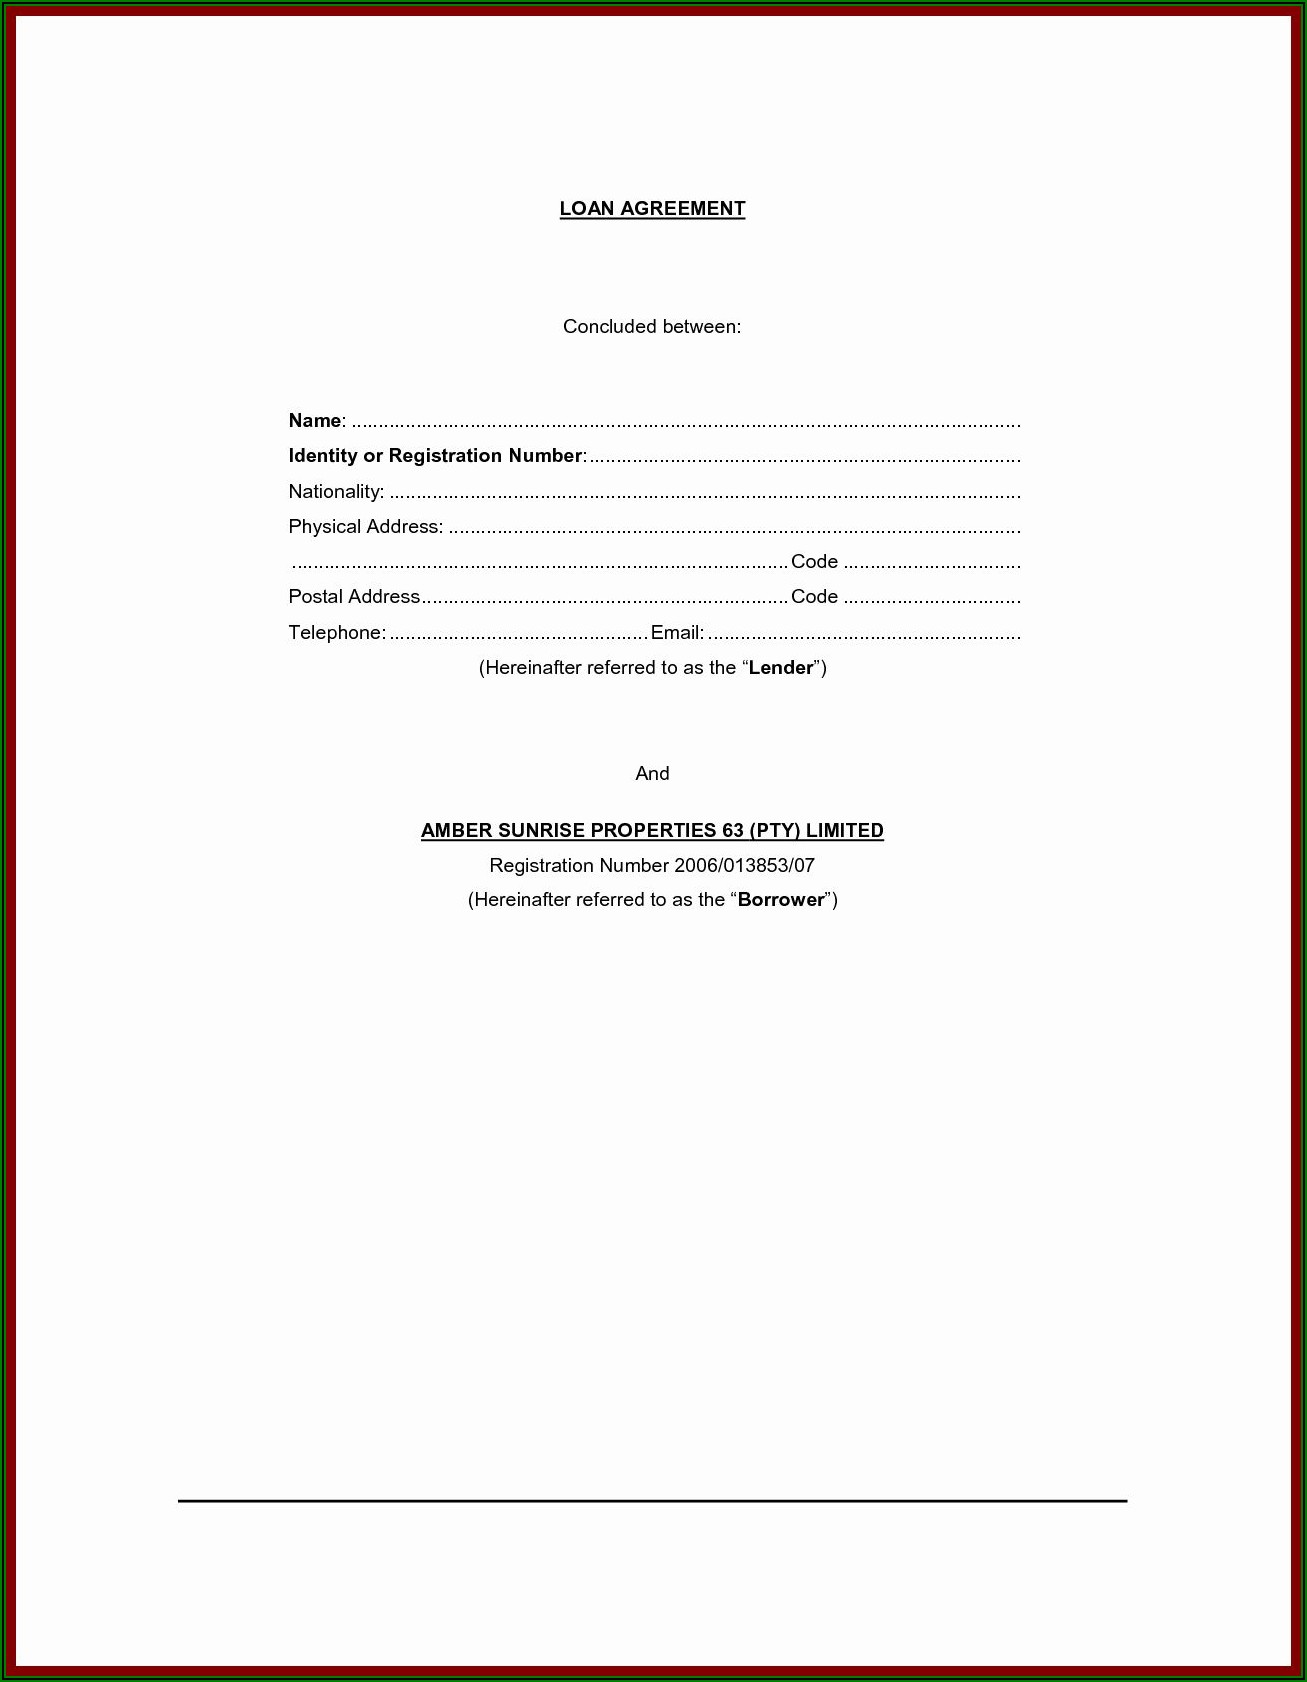 Sample Personal Loan Contract Agreement